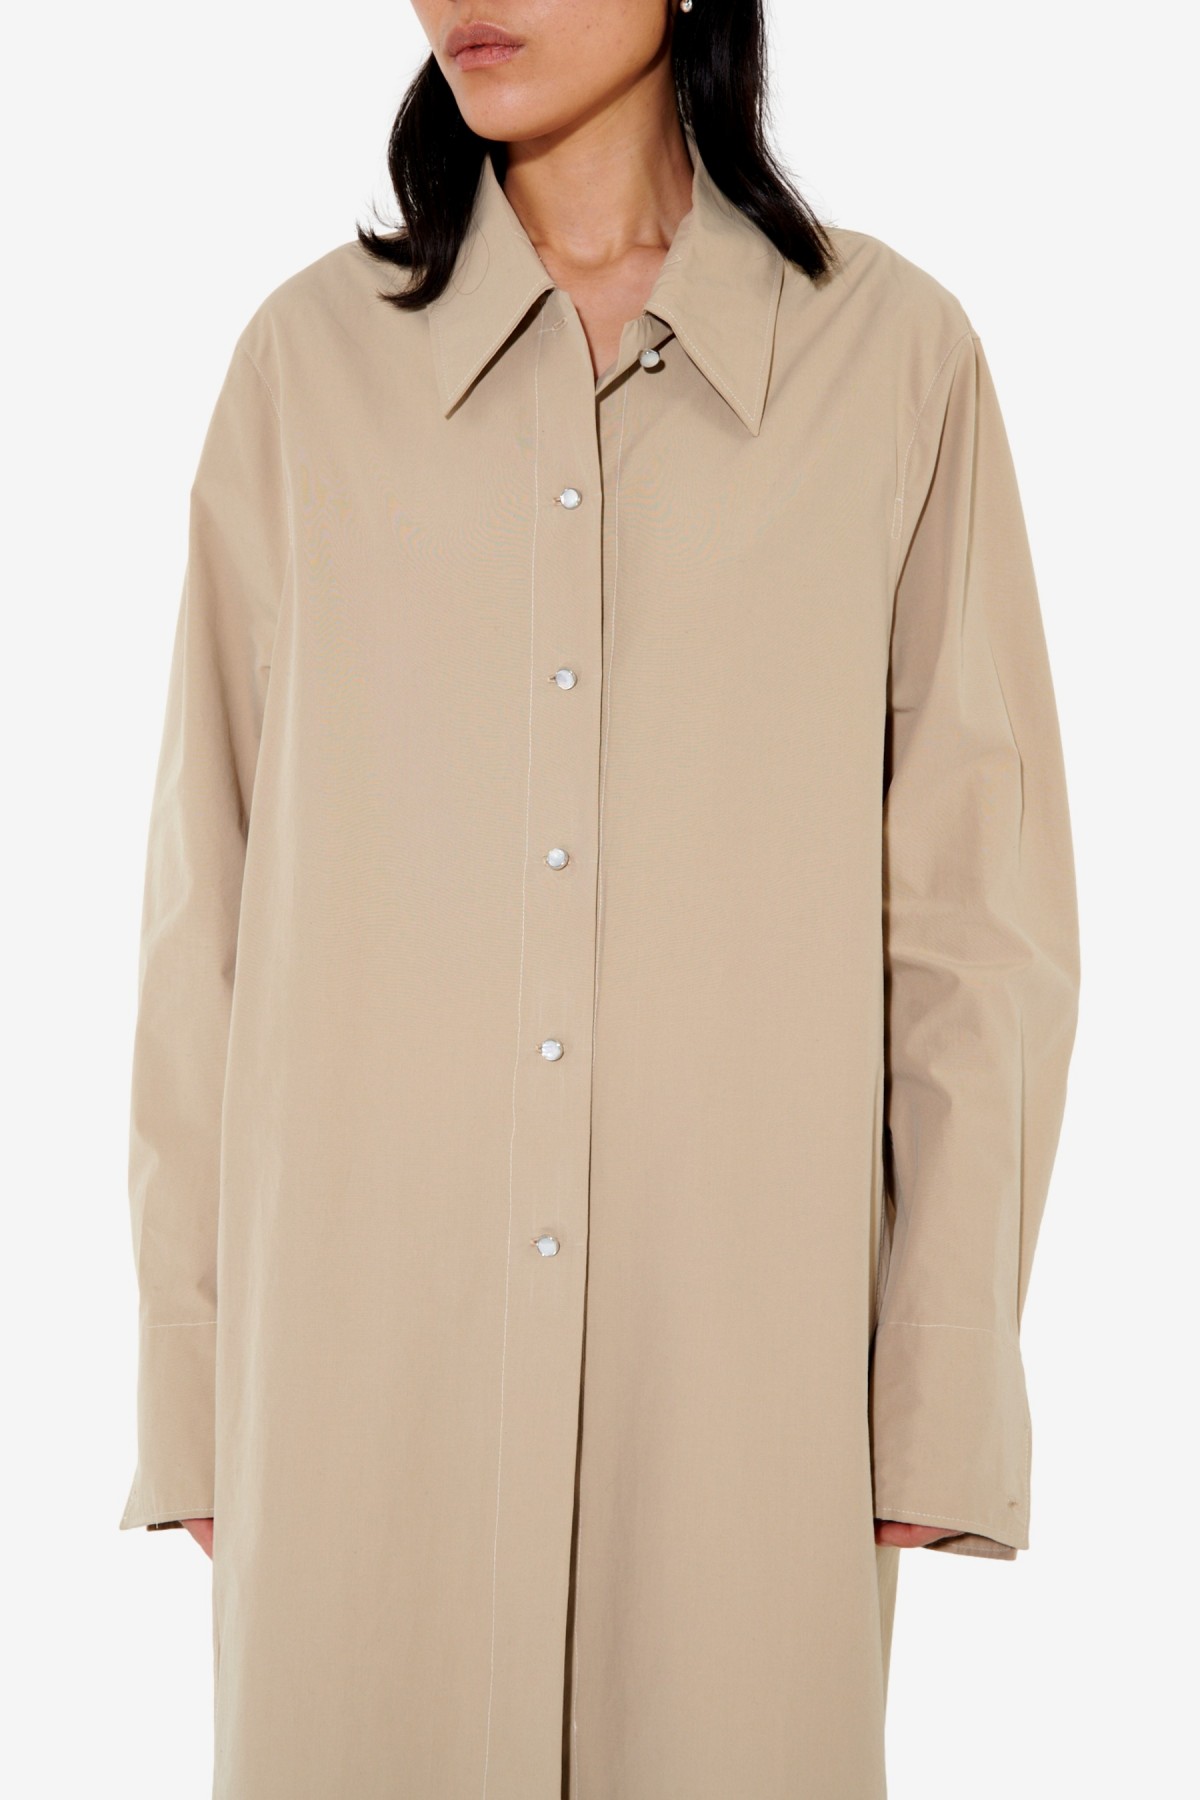 Our Legacy Welding Shirt Dress in Khaki Humble Cotton